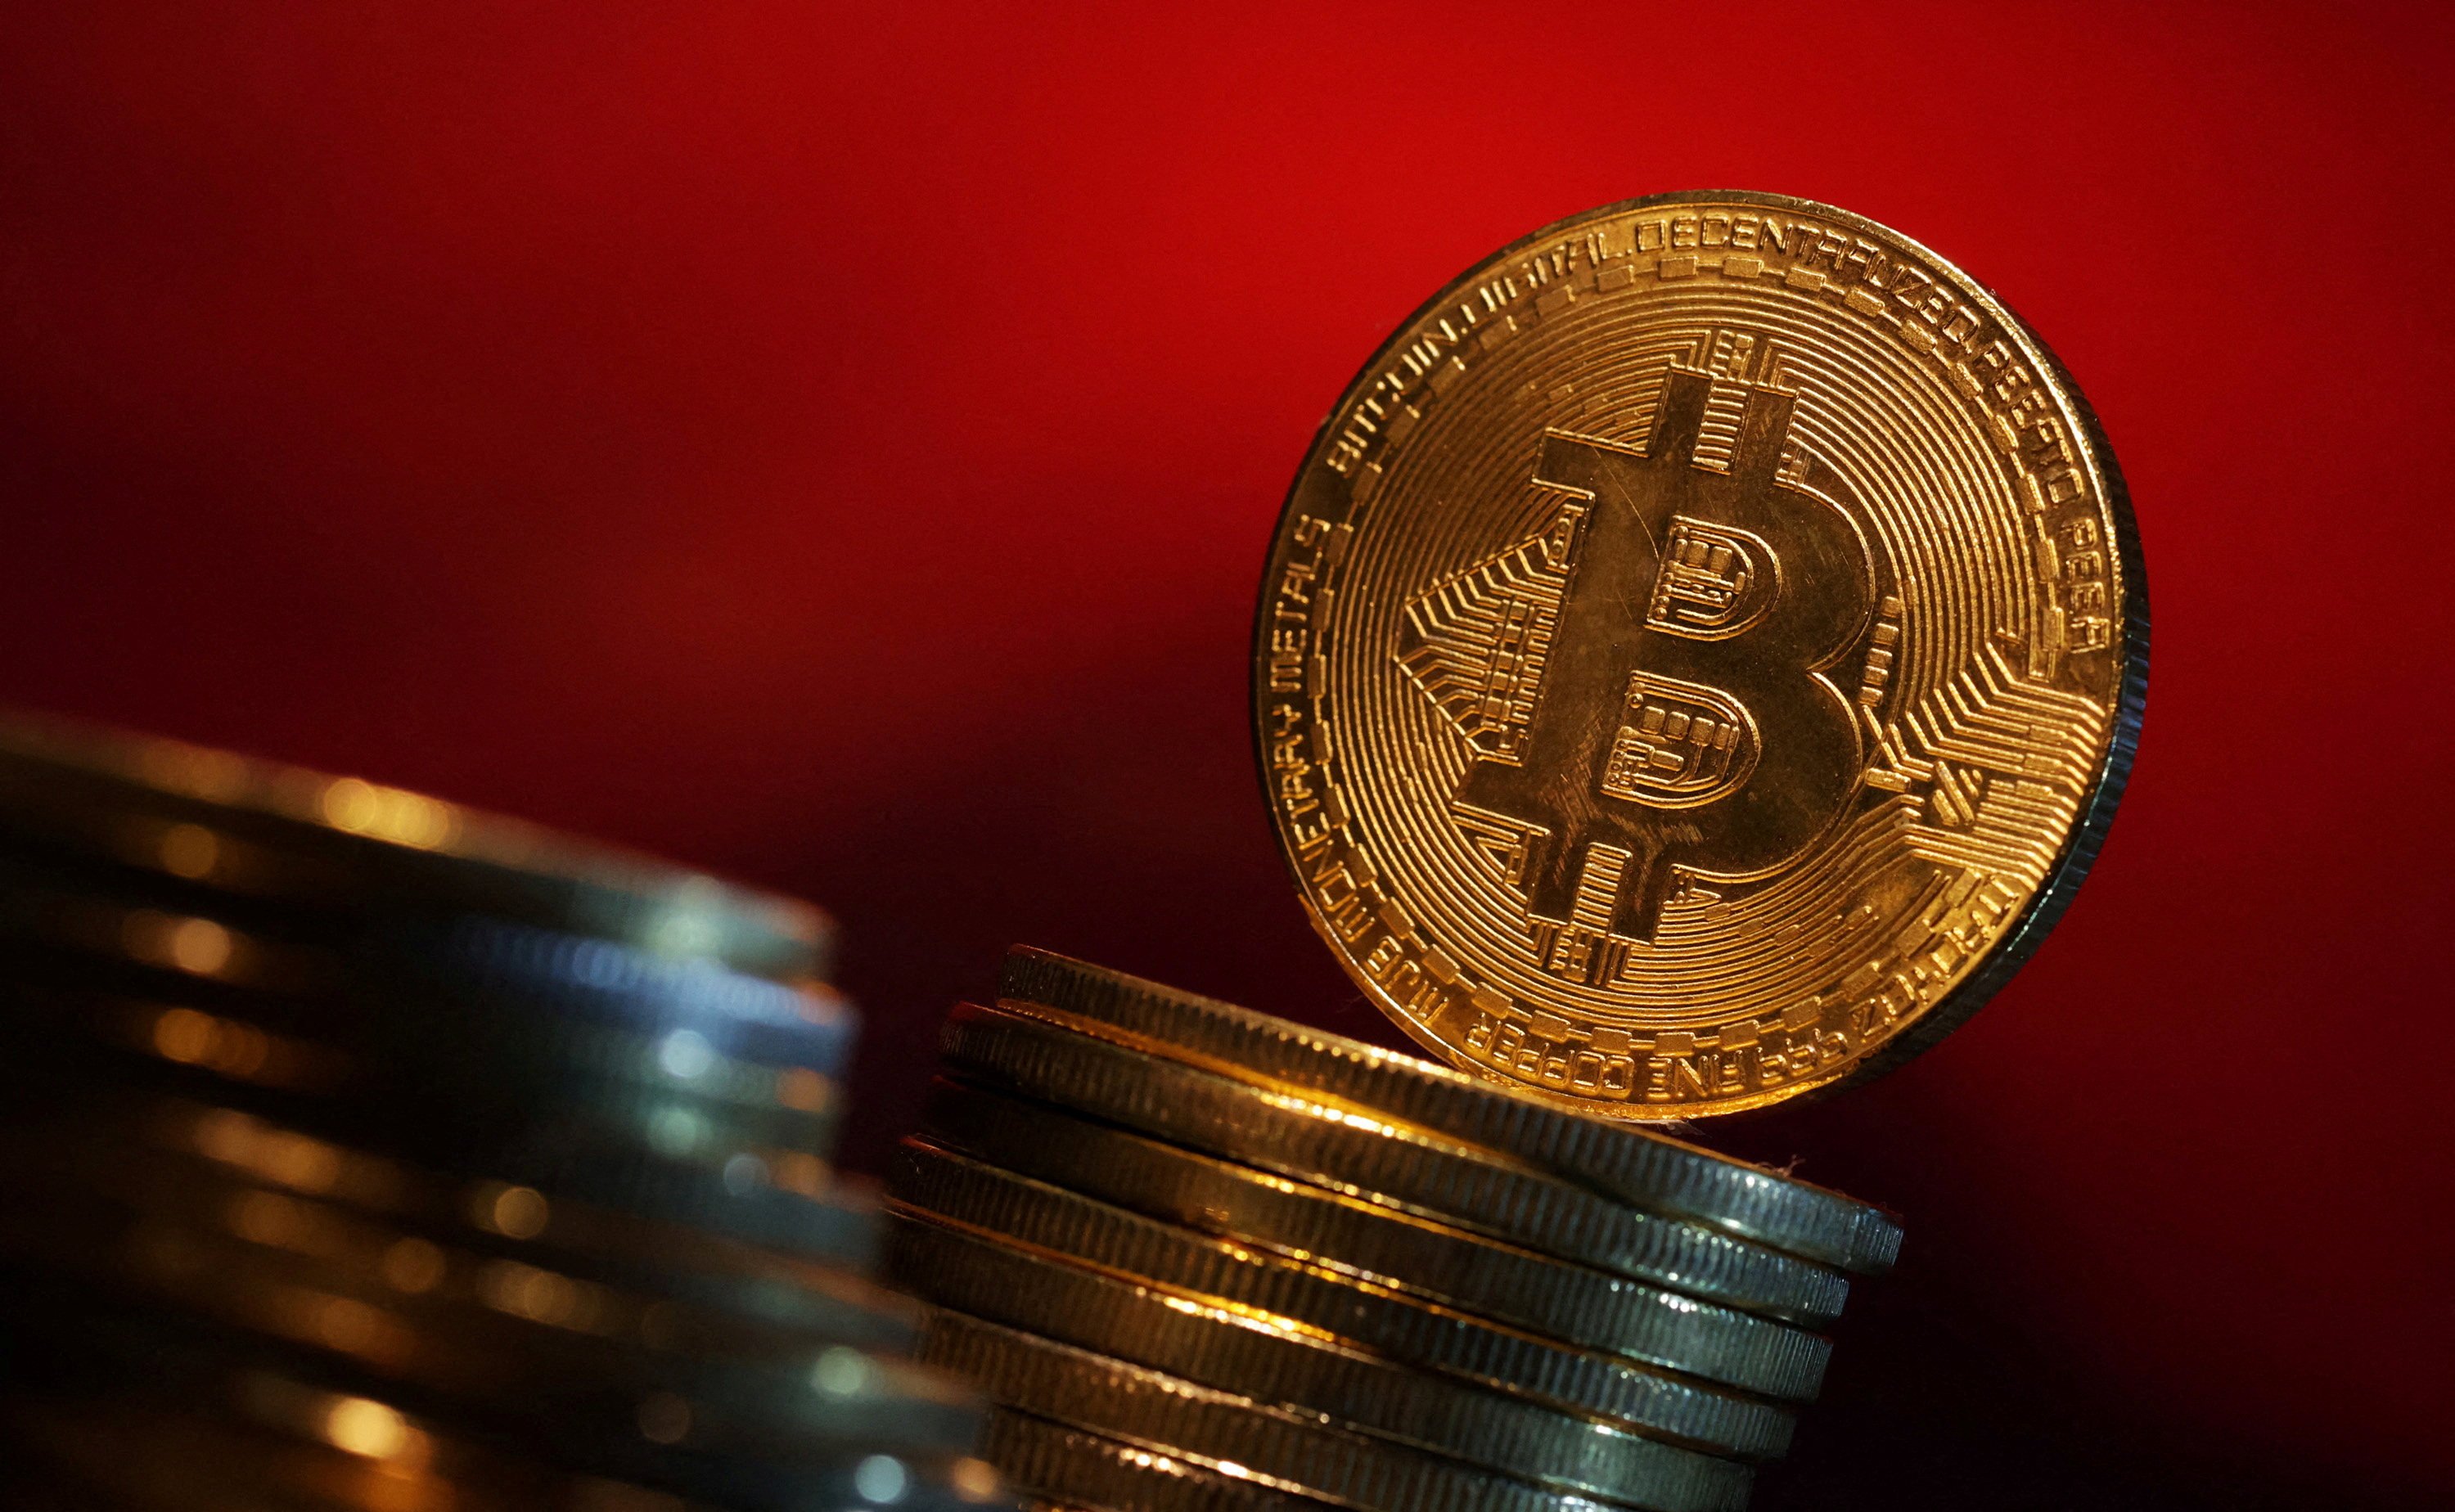 Given the popularity of bitcoin ETFs, regulators will need to step up their game when it comes to consumer protection,  according to the Franklin Templeton boss. Photo: Reuters